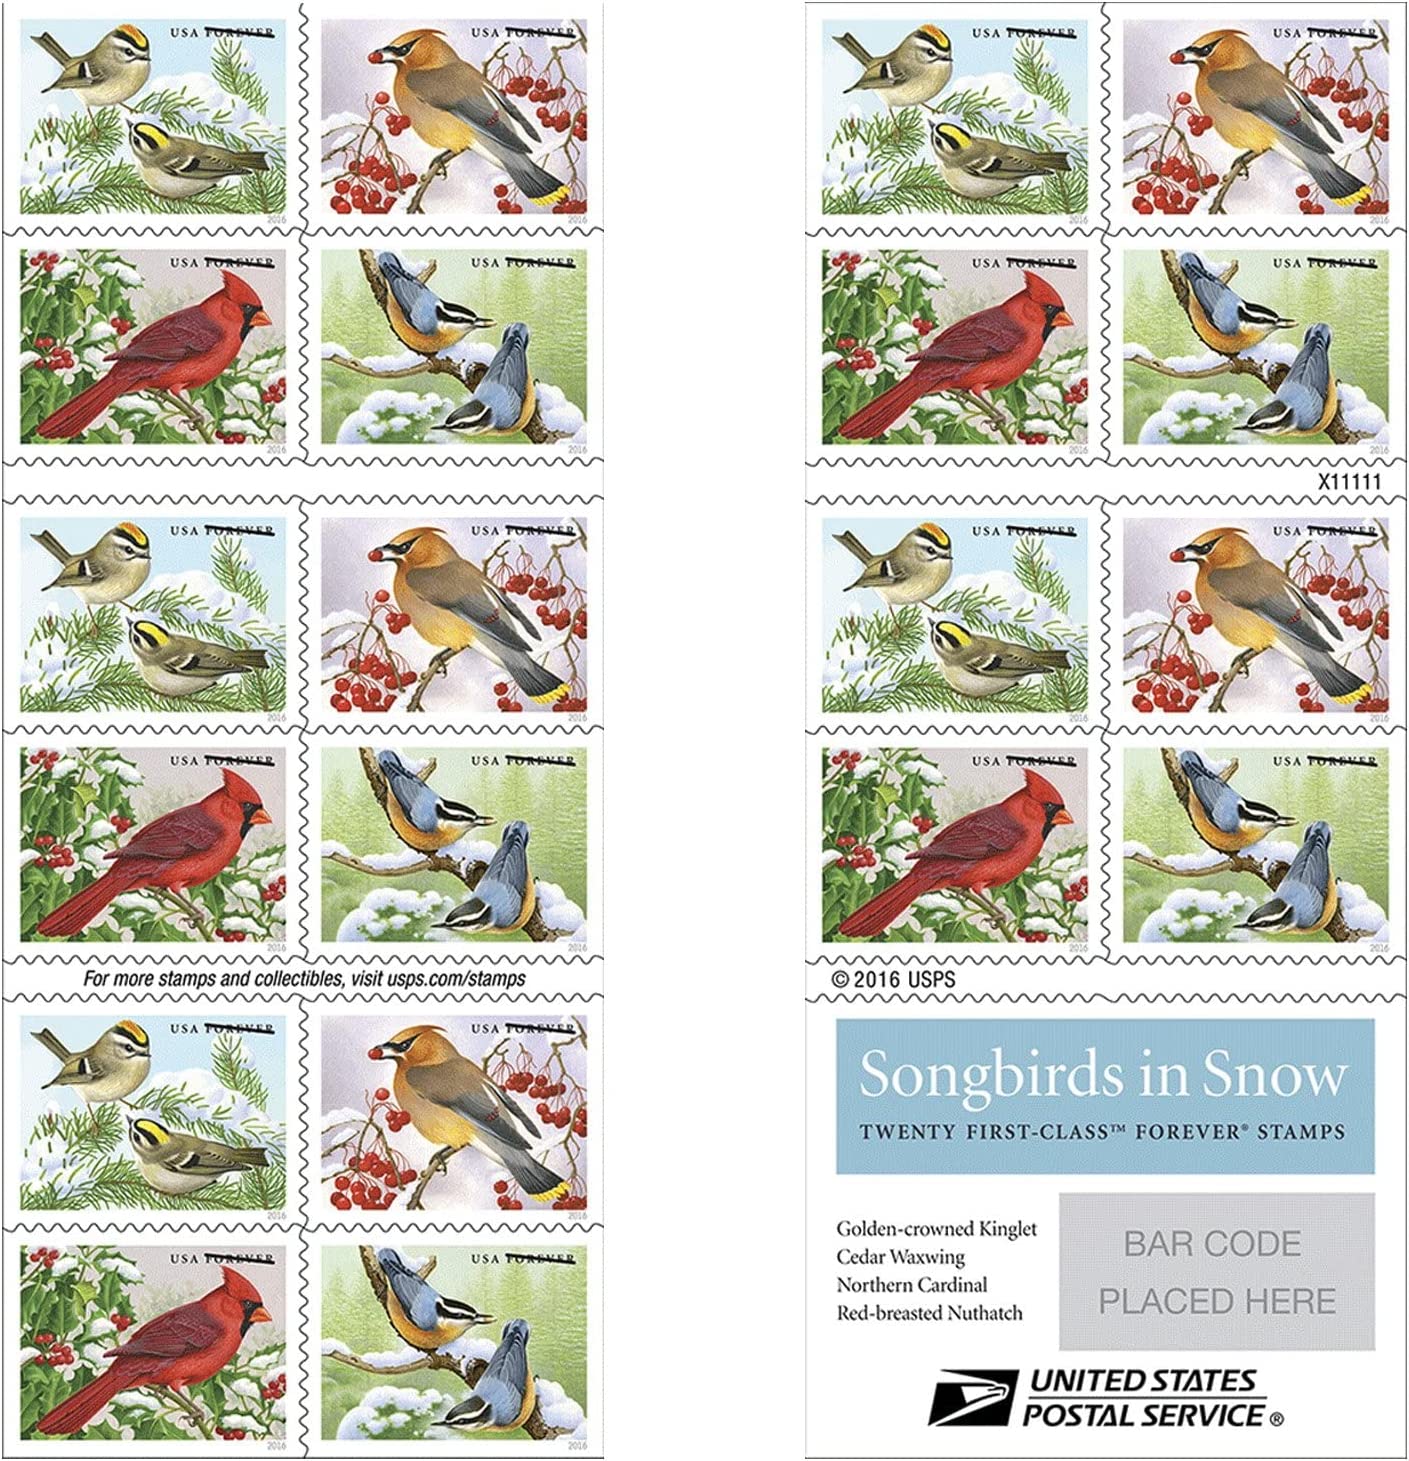 2016 USPS Songbirds in Snow Forever First Class Postage Stamps